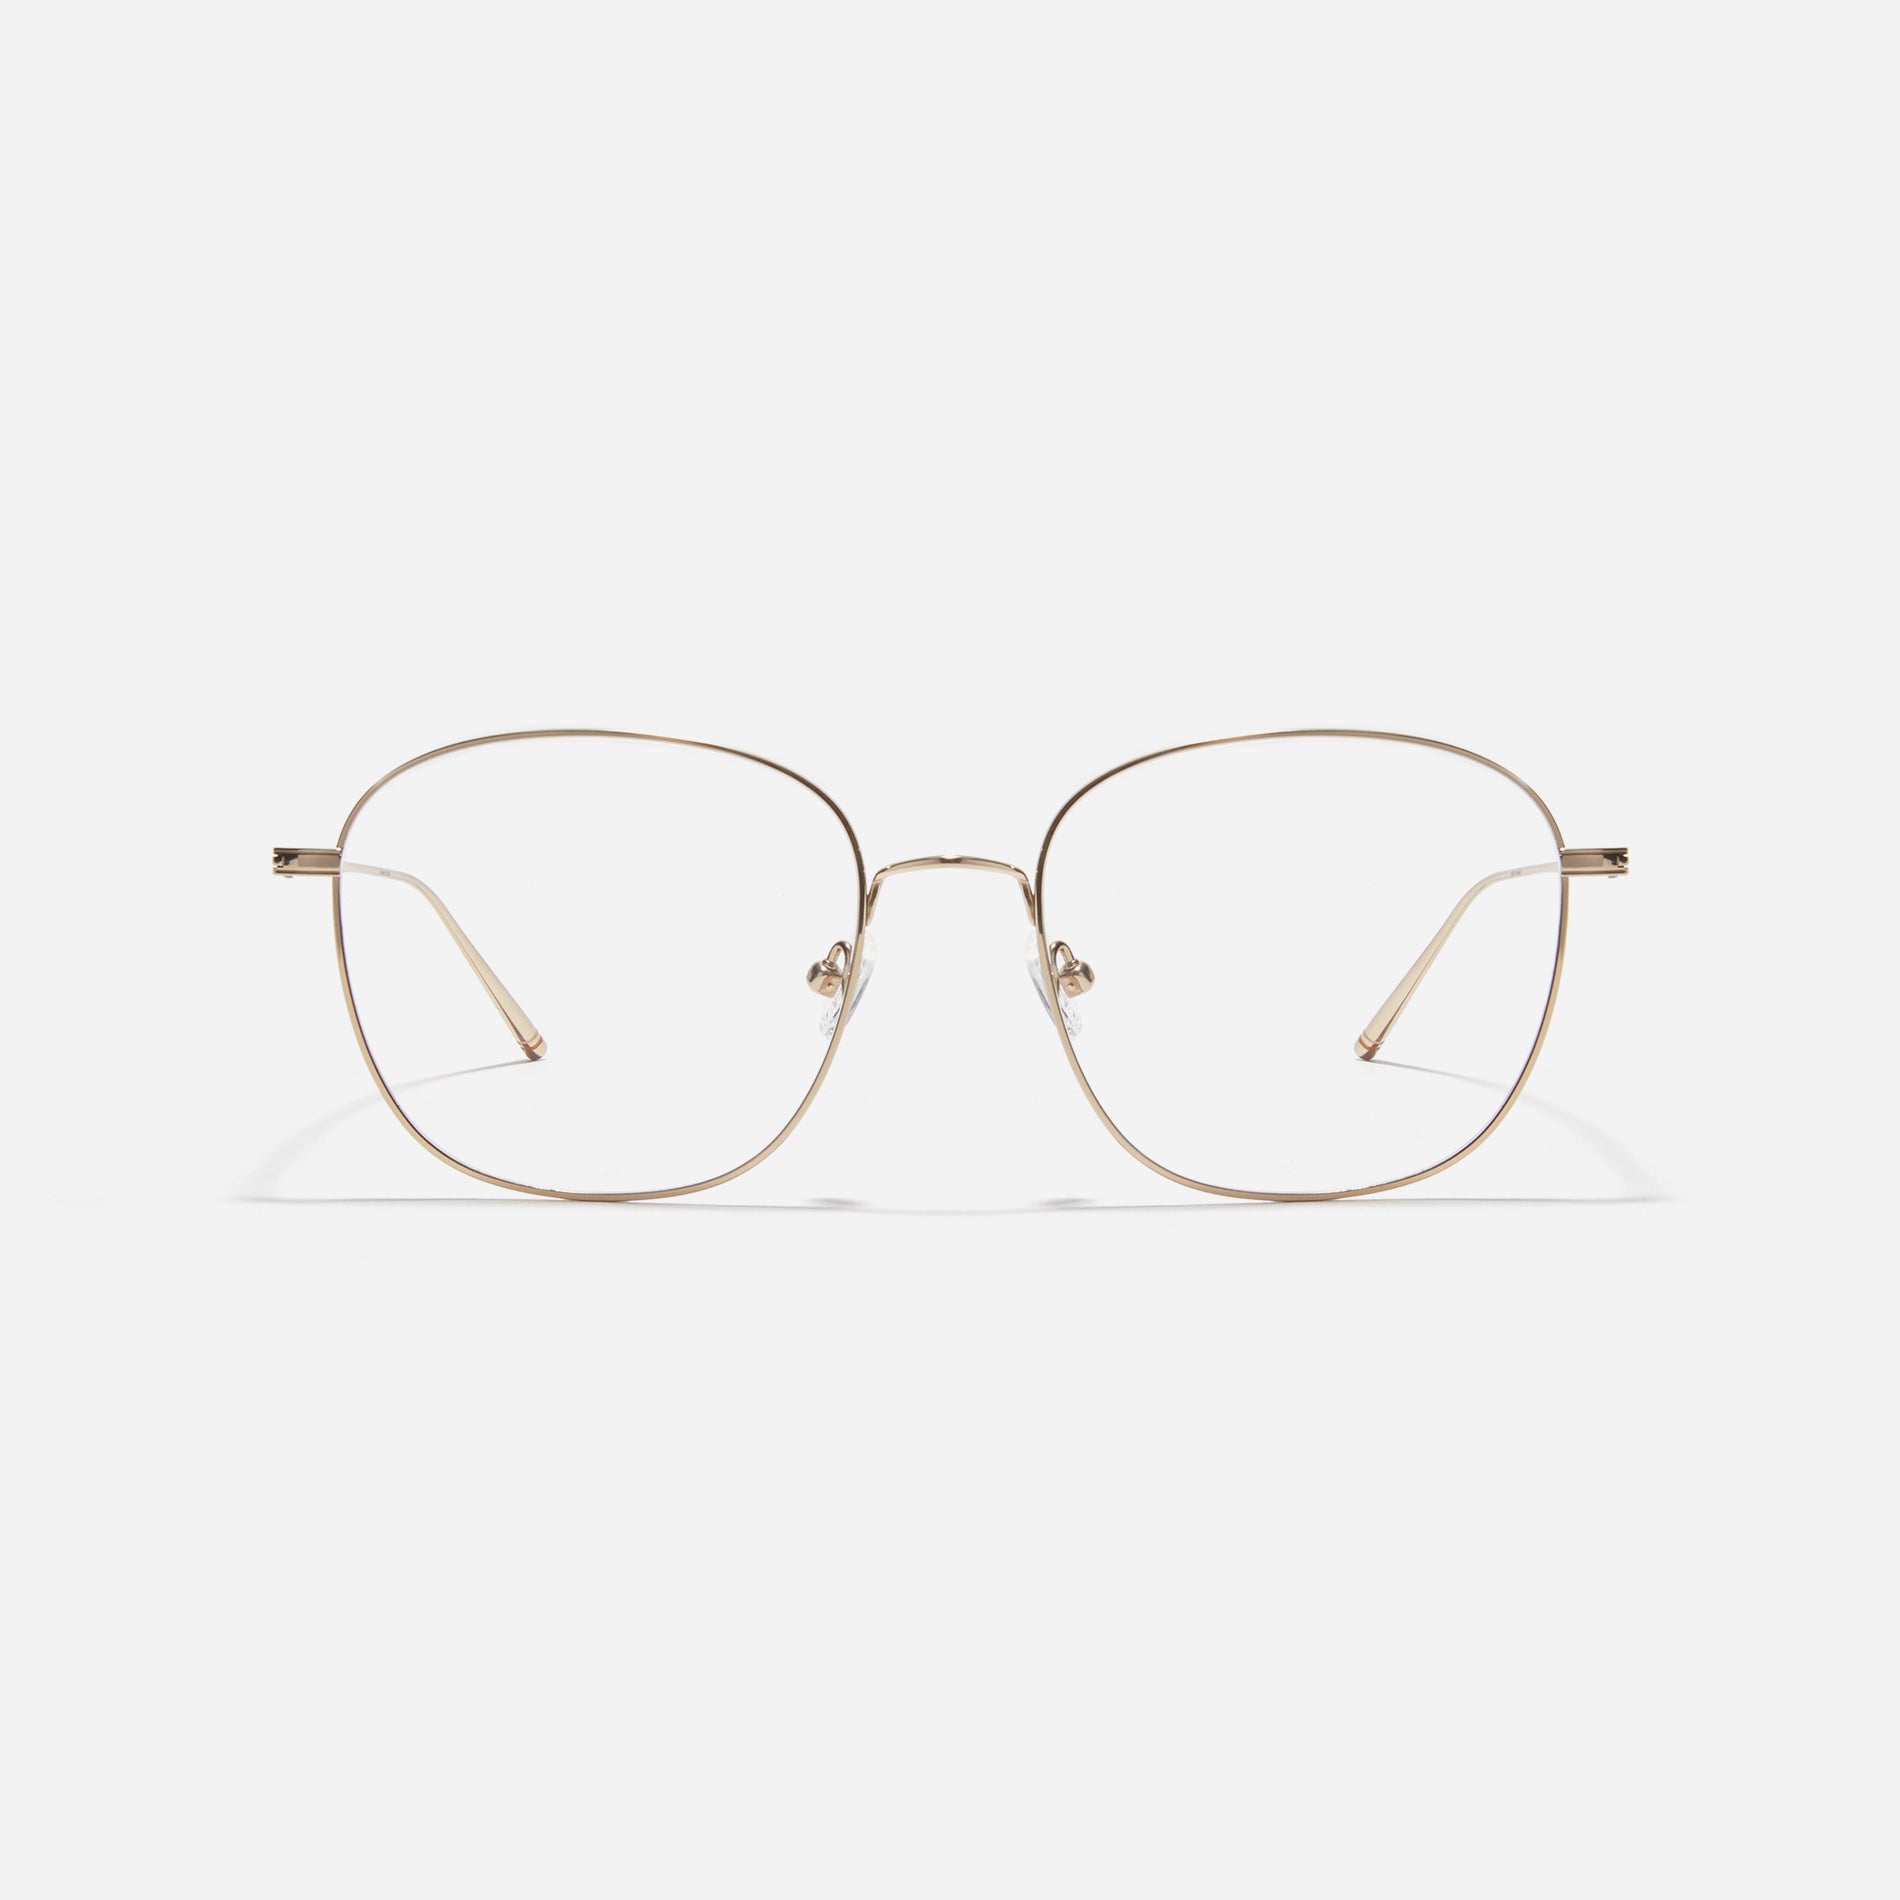 Square-shaped eyeglasses featuring distinctive oversized rims. Crafted entirely from titanium, they ensure a remarkably light and comfortable wearing experience.